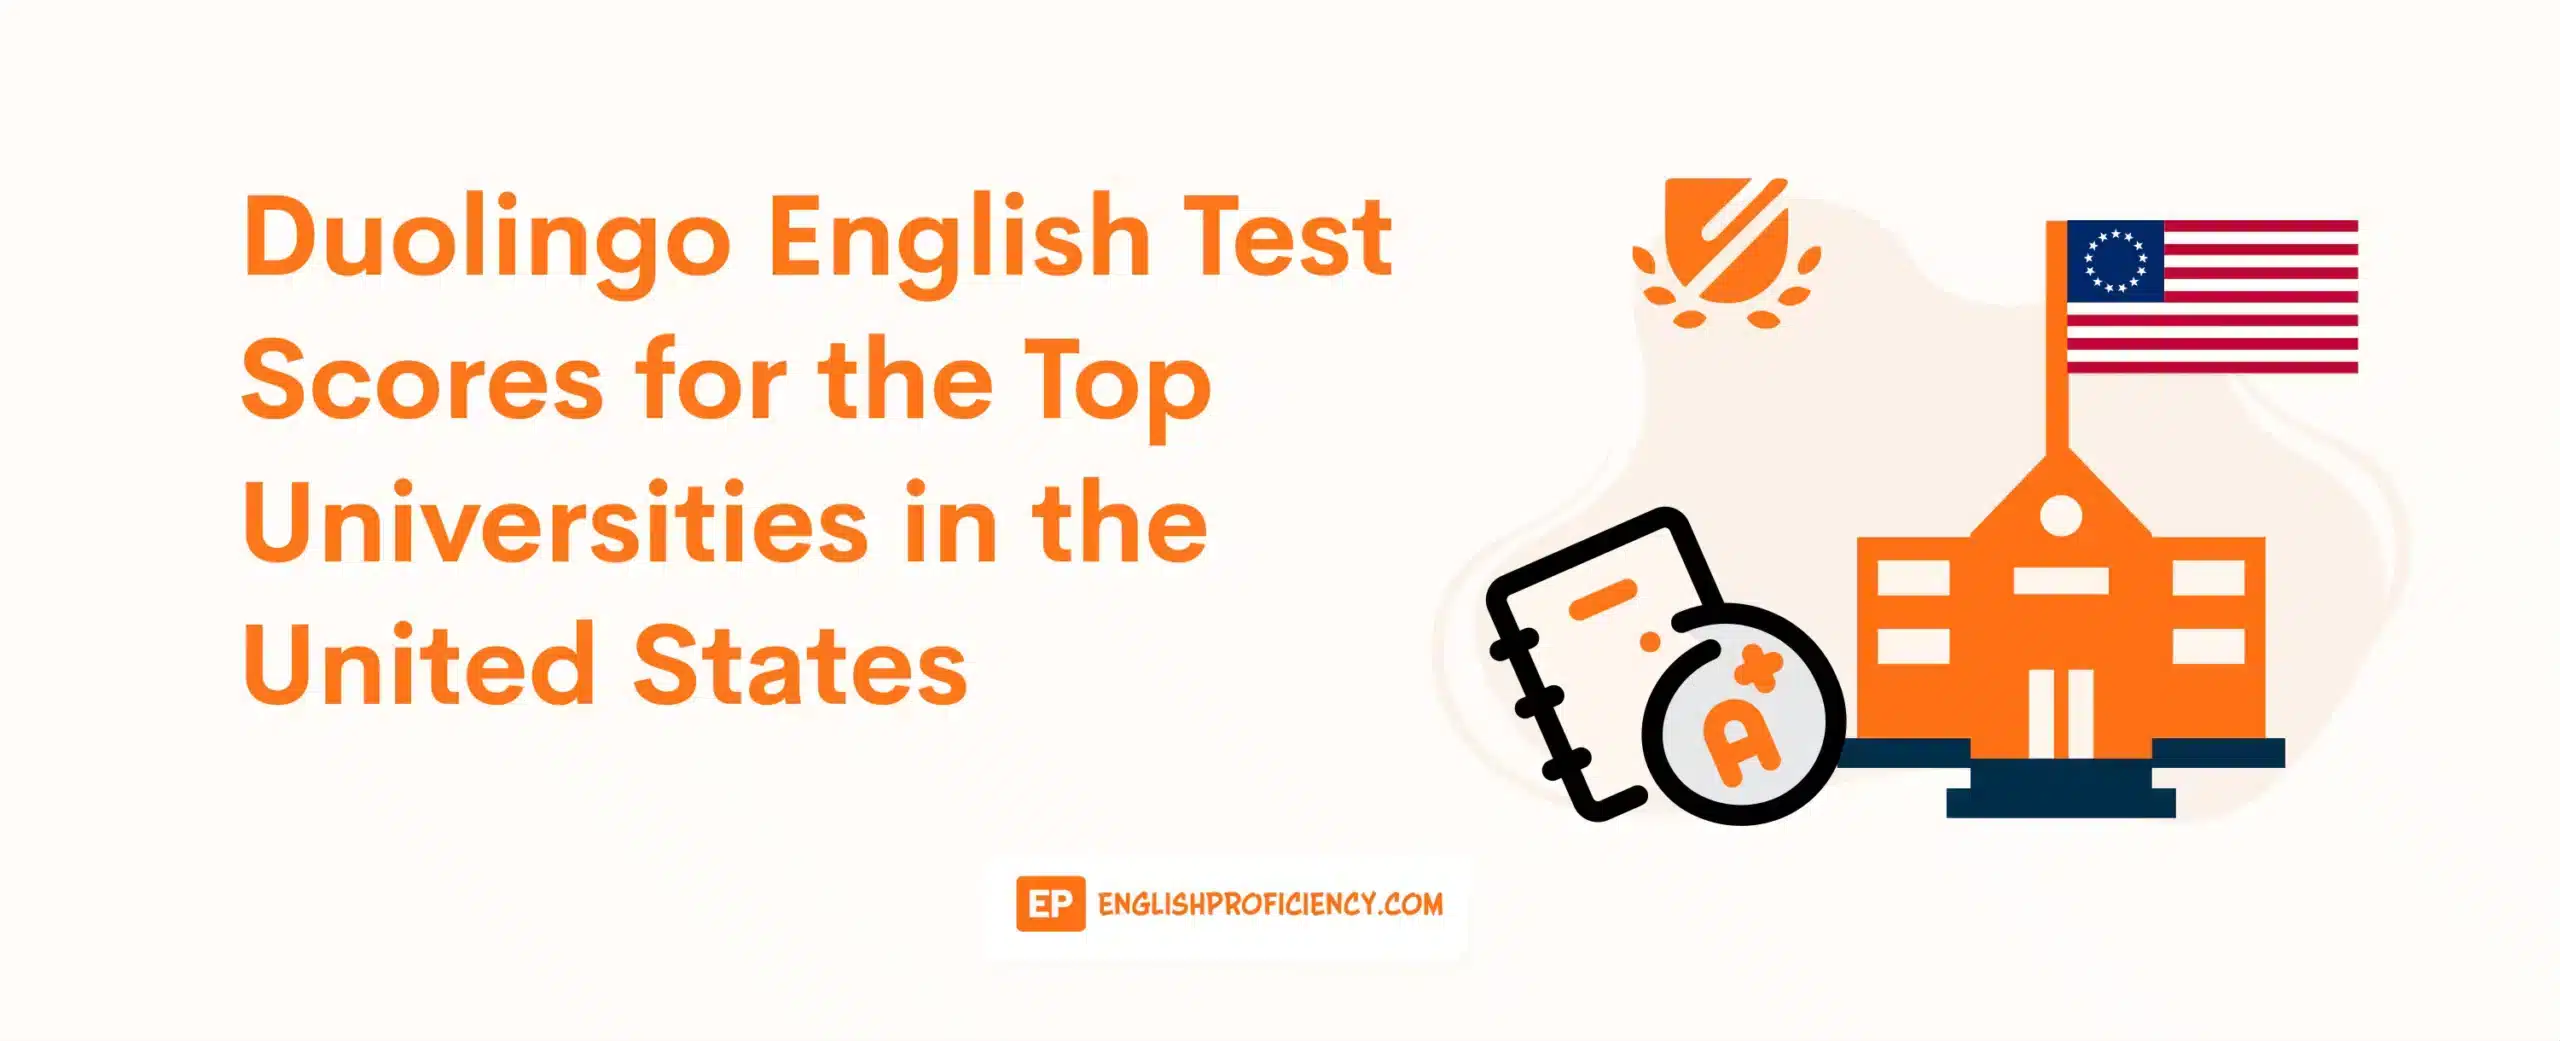 Duolingo English Test Scores for the Top Universities in the United States